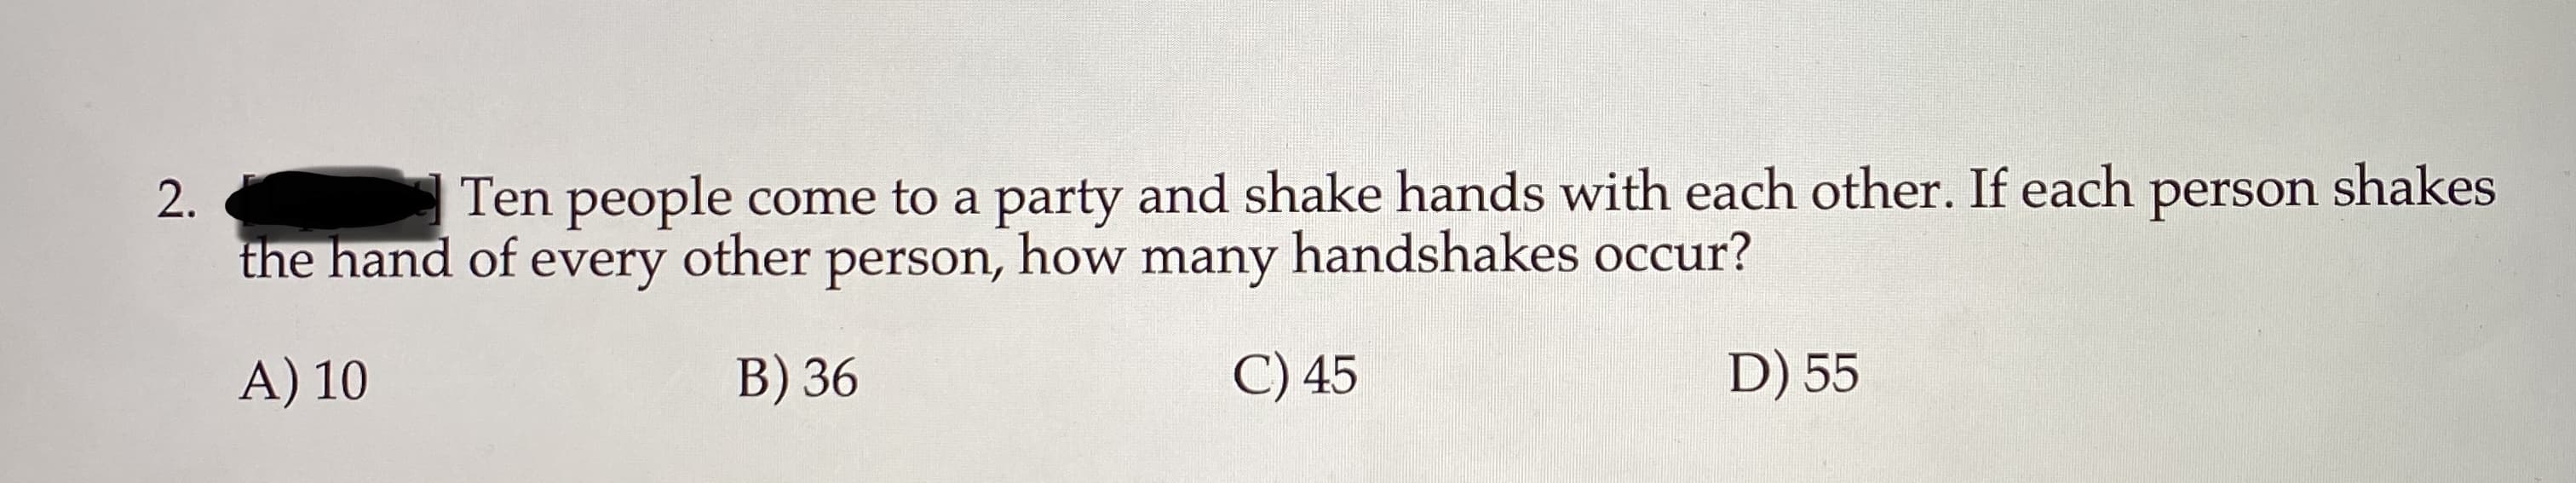 Ten people come to a party and shake hands with each other. If each person shakes
the hand of every other person, how many handshakes occur?
A) 10
D) 55
B) 36
C) 45
